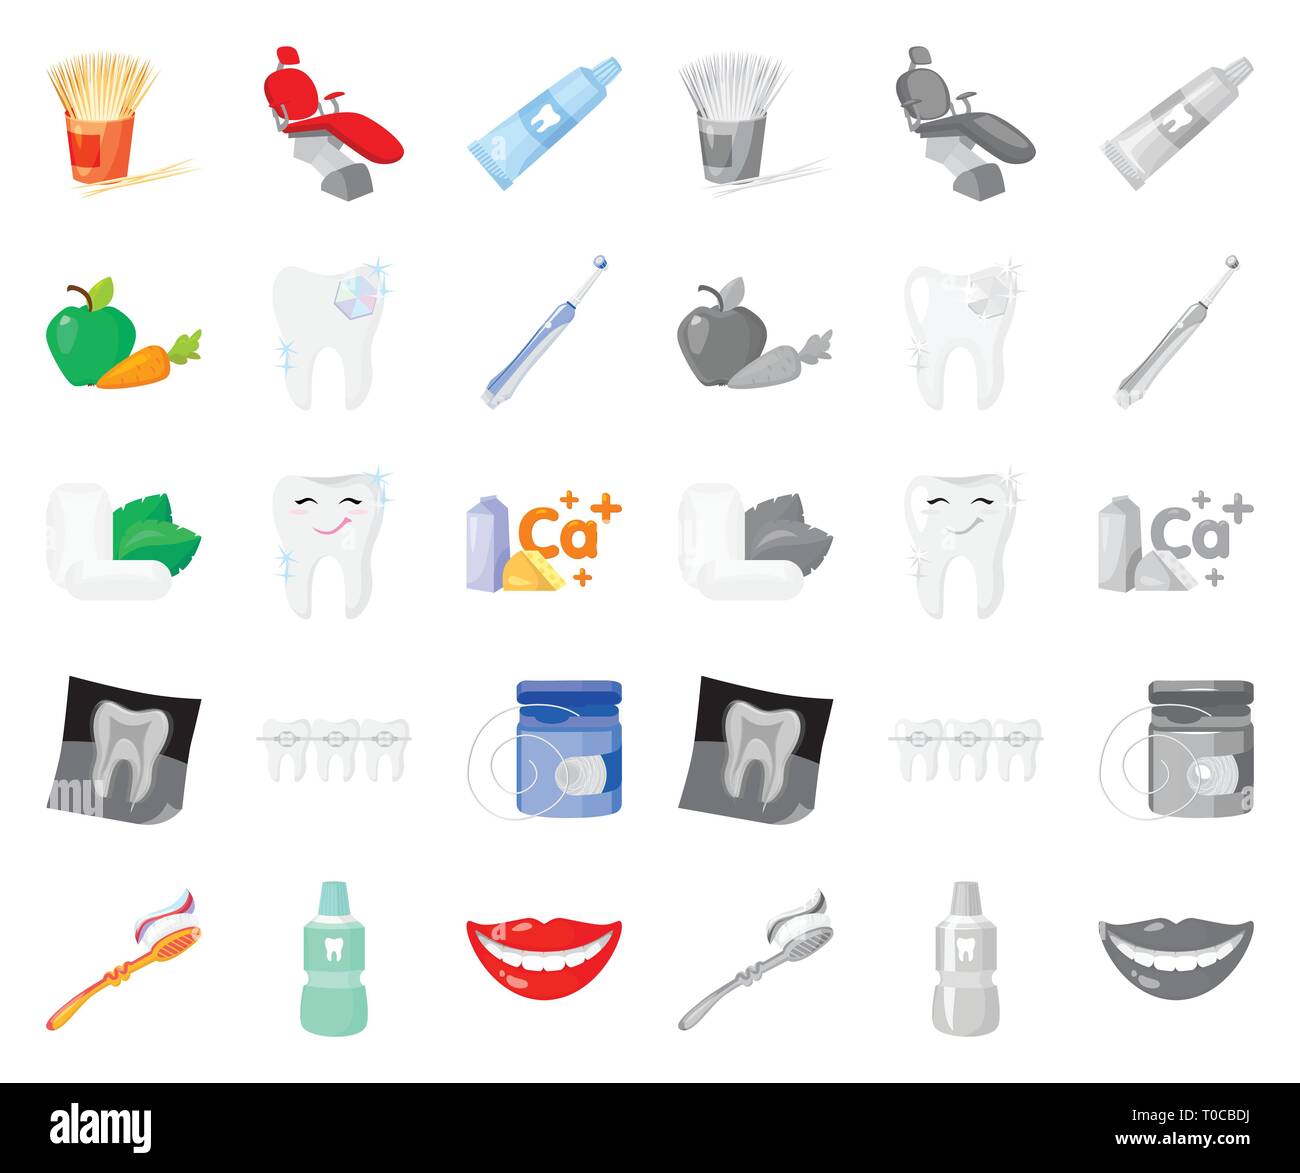 adaptation,apple,art,bottle,braces,calcium,care,carrot,cartoon,mono,chair,chewing,clinic,collection,dental,dentist,dentistry,design,diamond,doctor,electric,equipment,floss,gum,hygiene,icon,illustration,instrument,isolated,logo,medicine,mouthwash,ray,set,sign,smile,smiling,sources,symbol,teeth,tooth,toothbrush,toothpaste,toothpick,treatment,vector,web,white,x Vector Vectors , Stock Vector